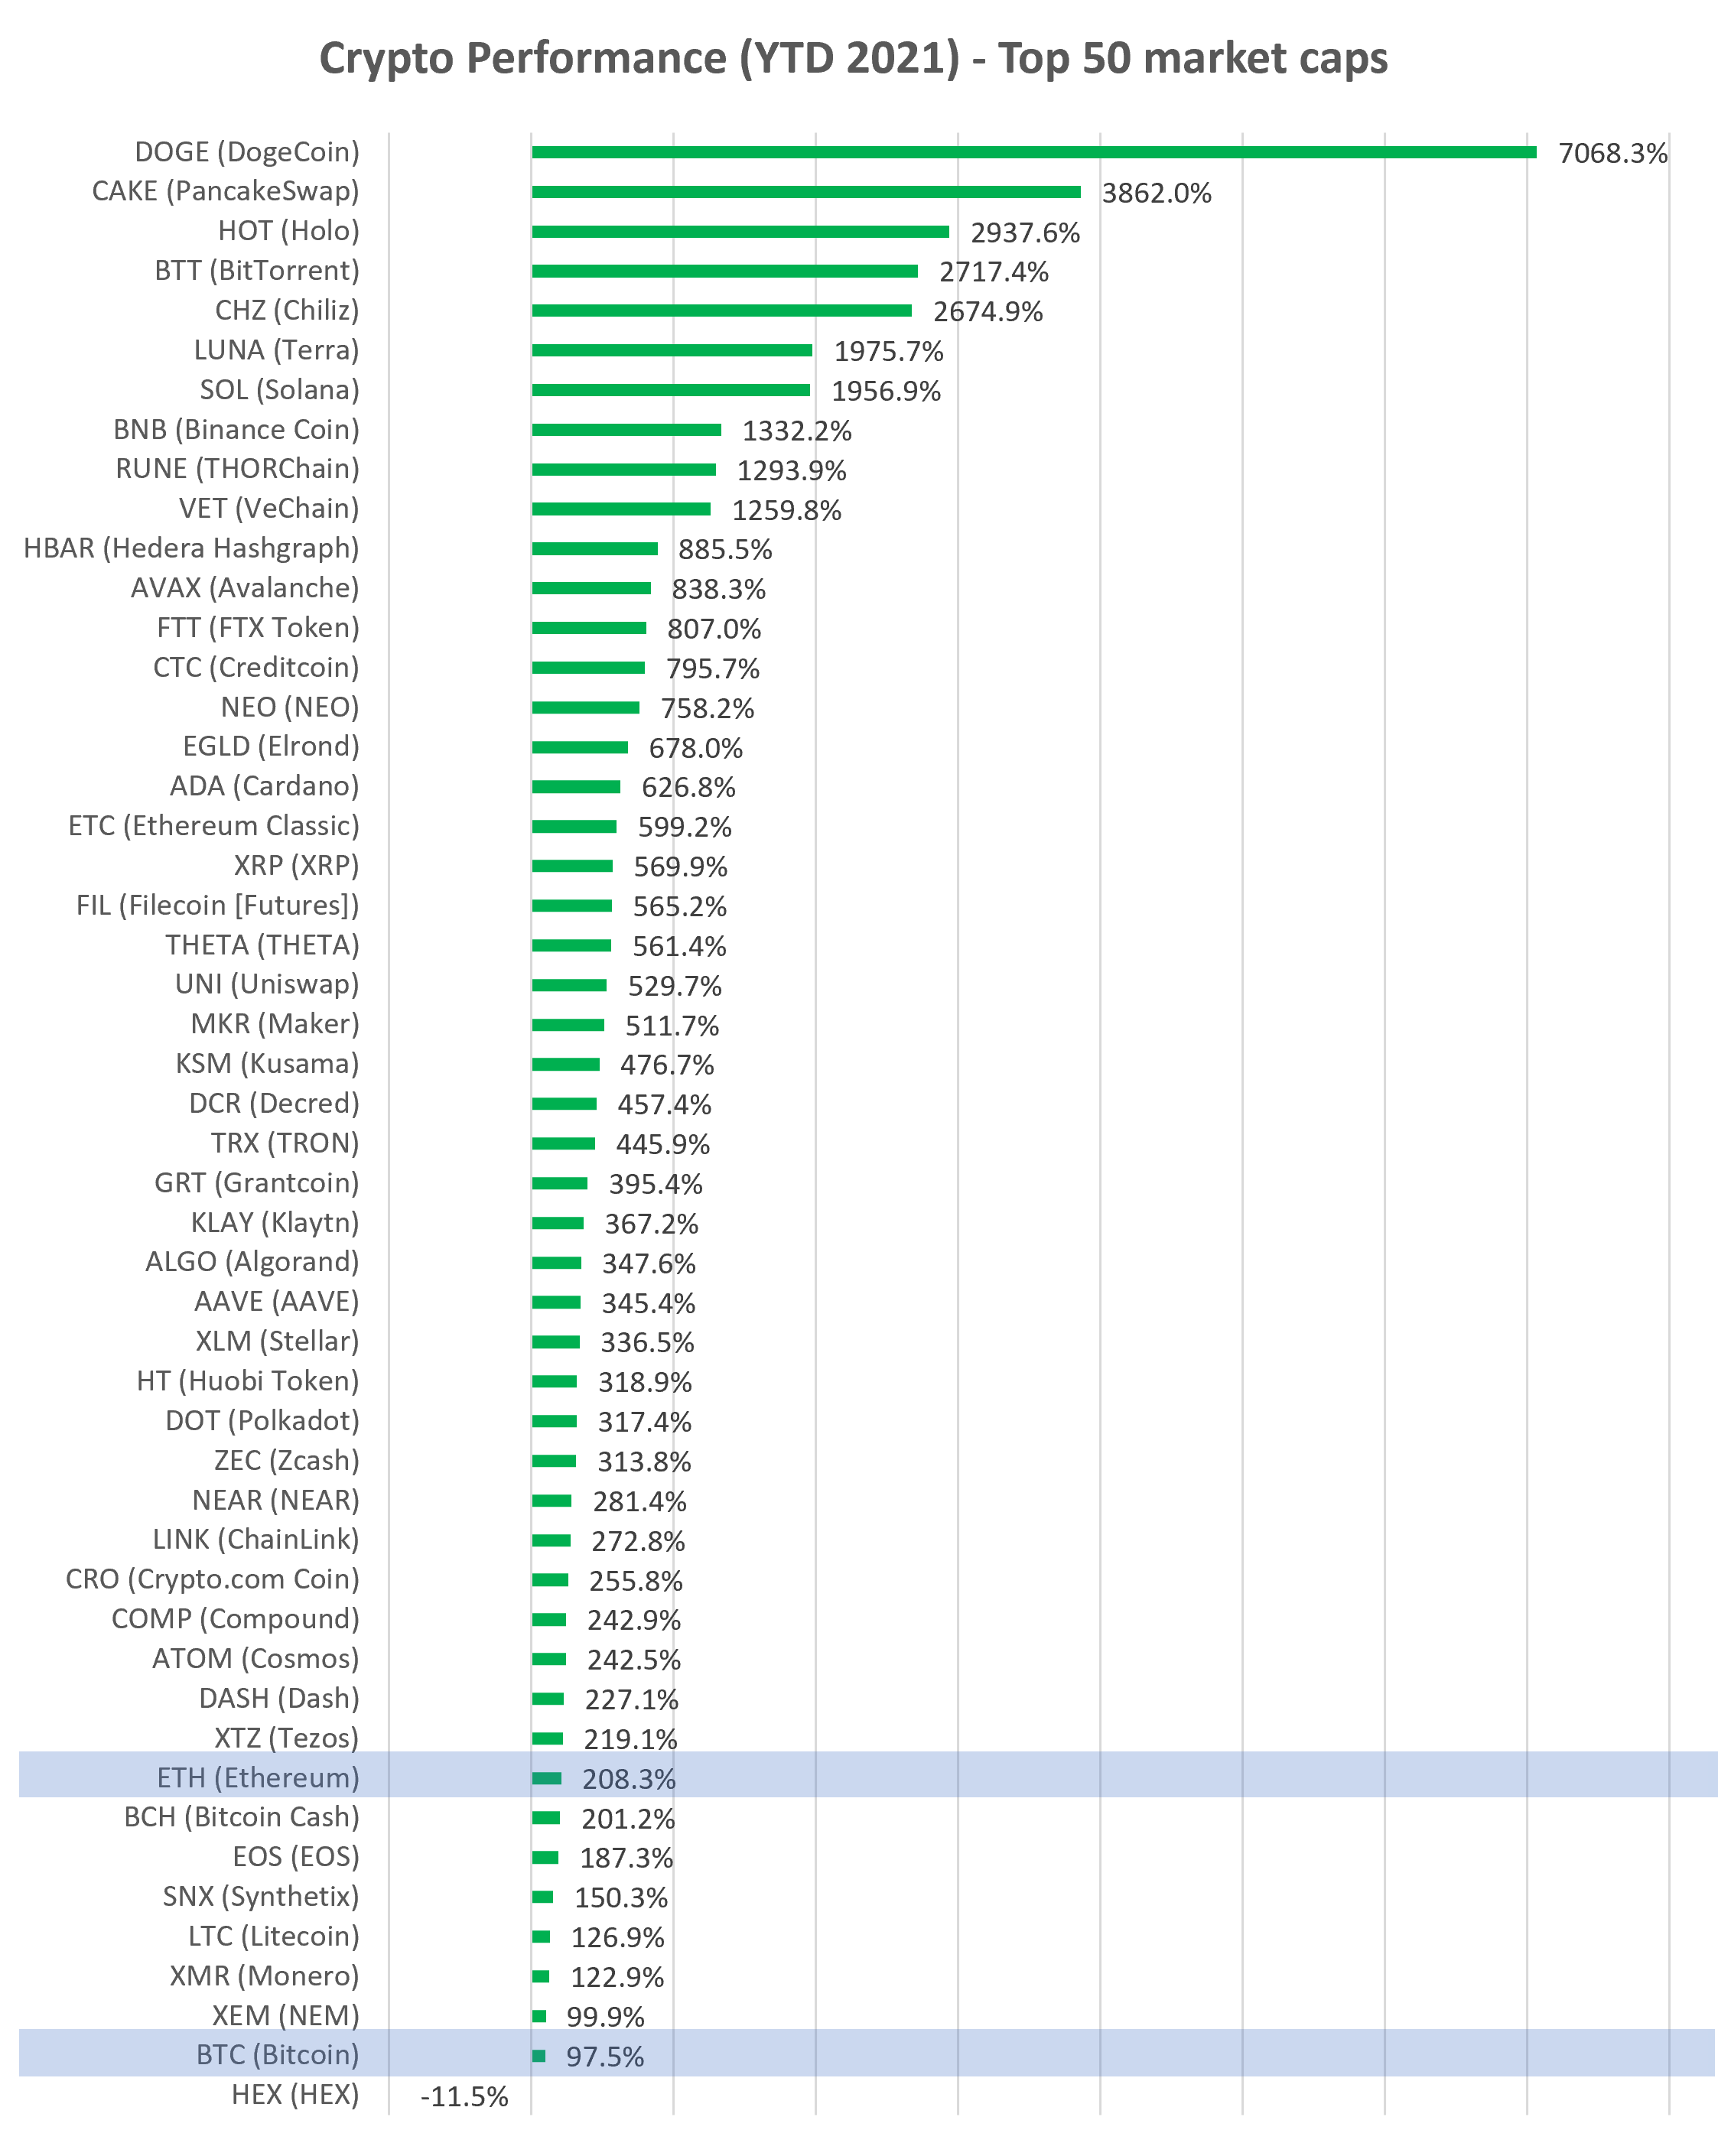 Cryptocurrency YTD performance top 50 market cap